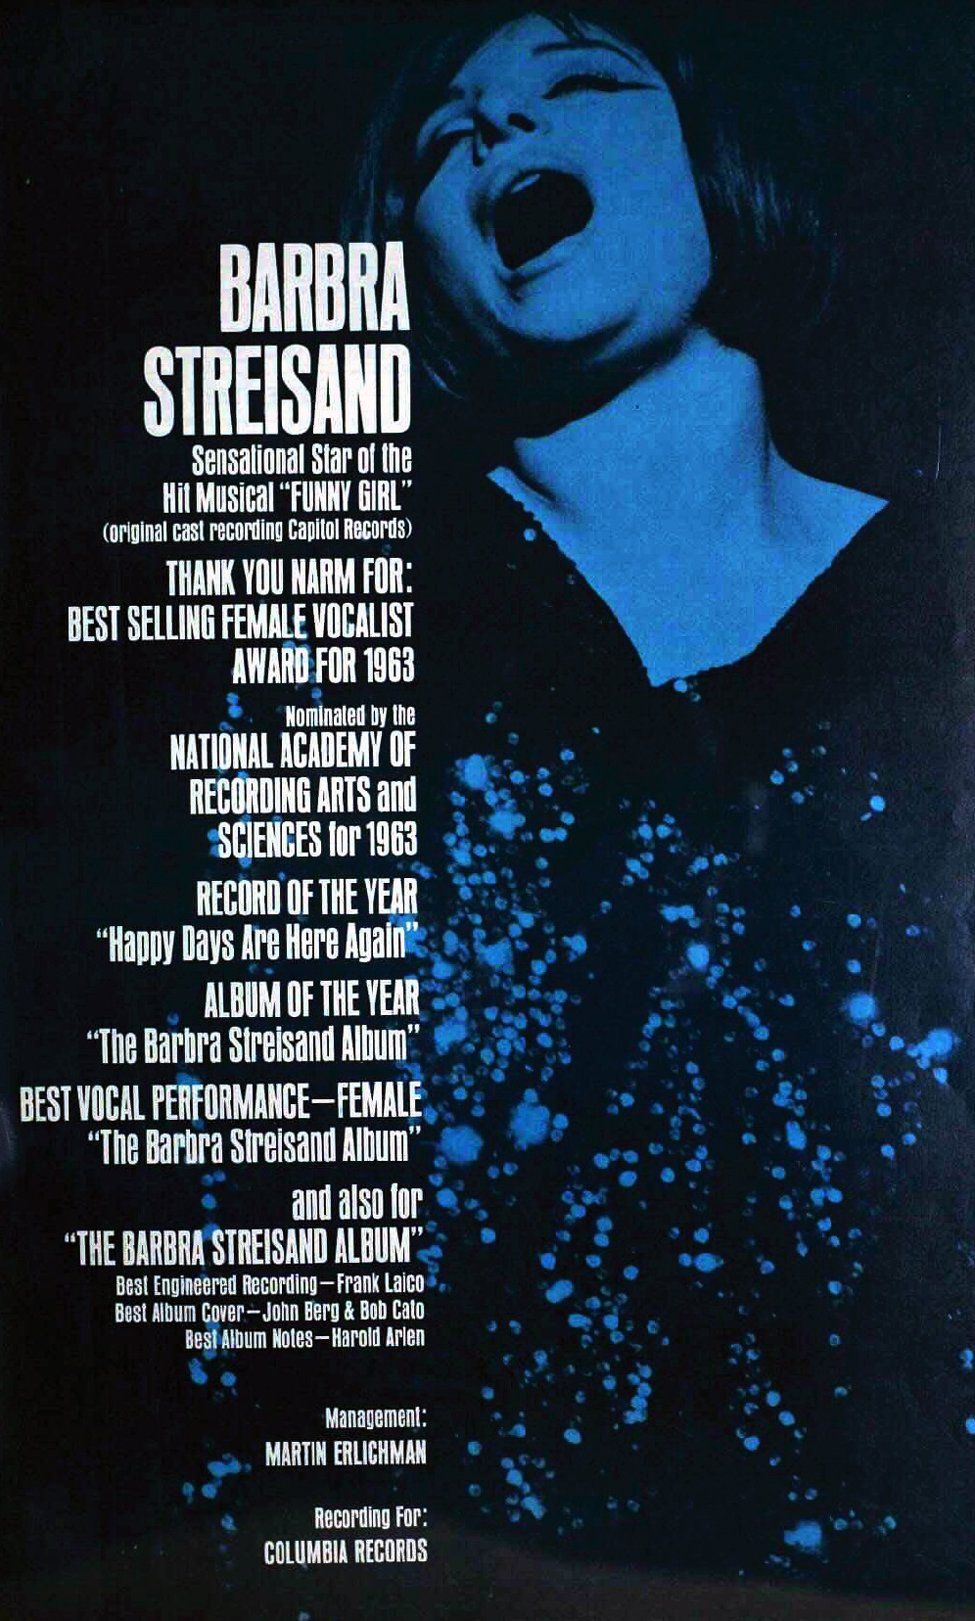 Thank You ad for nominations and awards for The Barbra Streisand Album